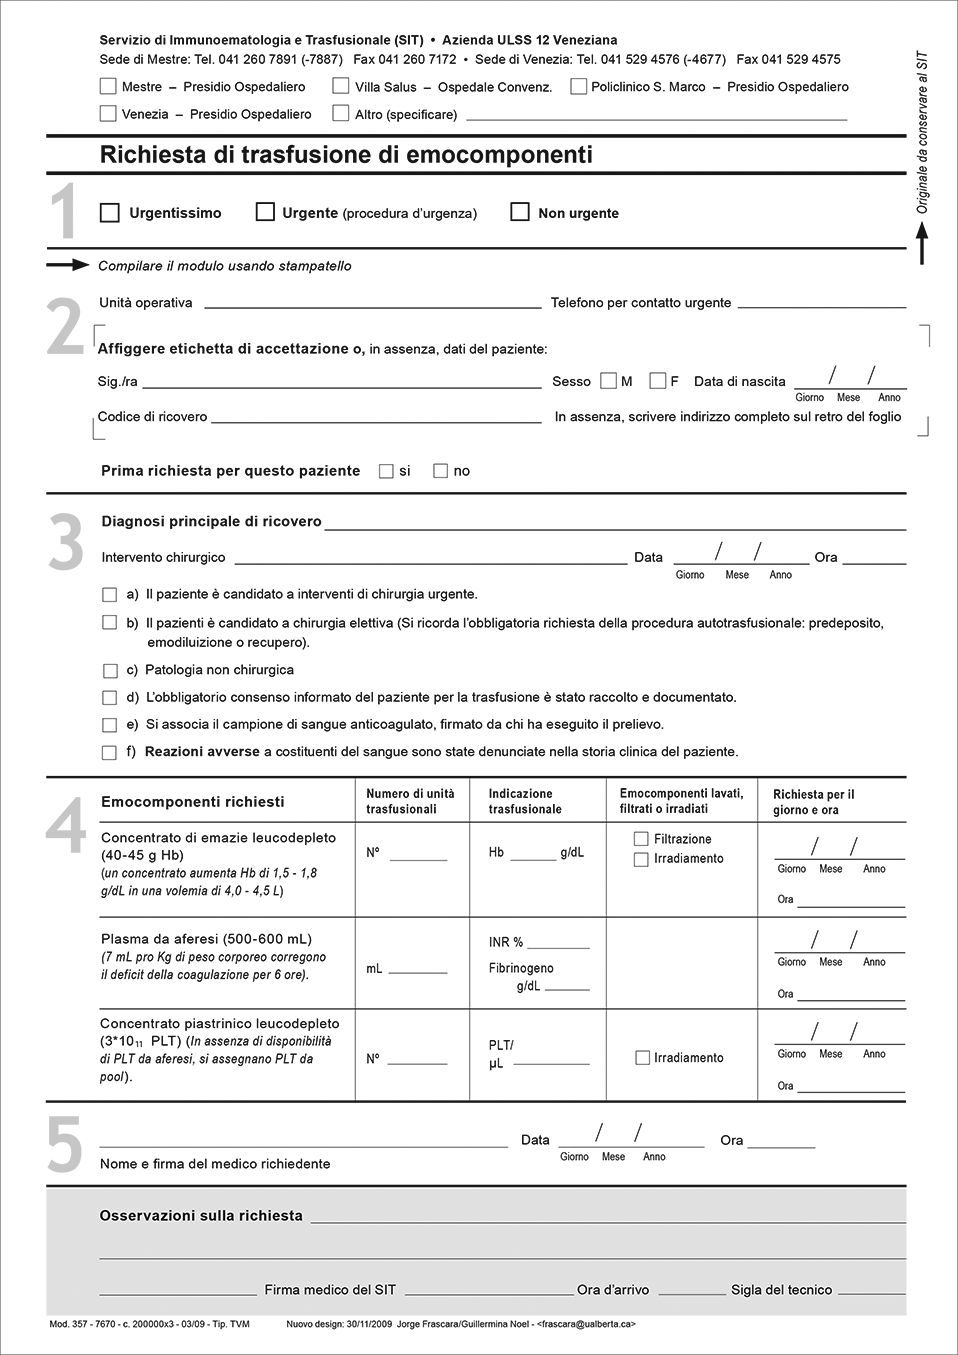 Figure 2: Final design for the blood transfusion request form.